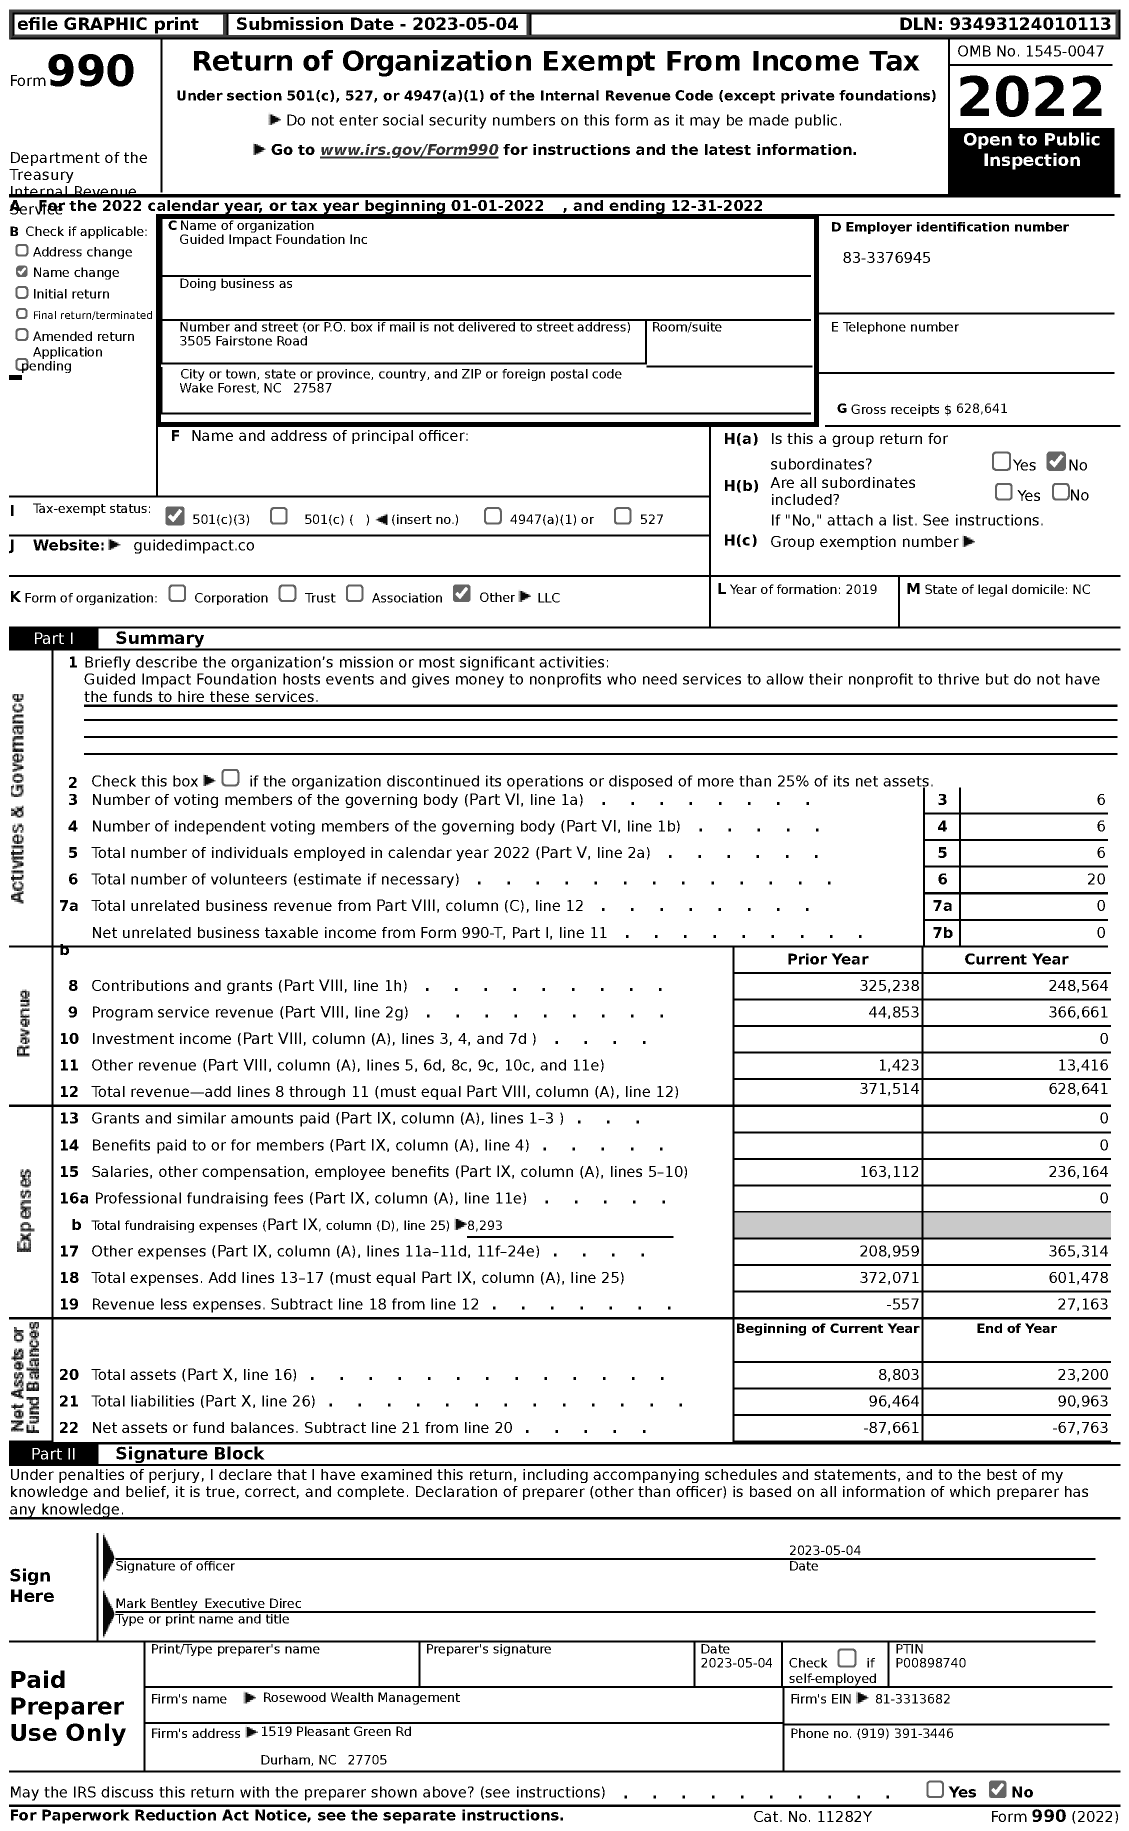 Image of first page of 2022 Form 990 for Guided Impact Foundation